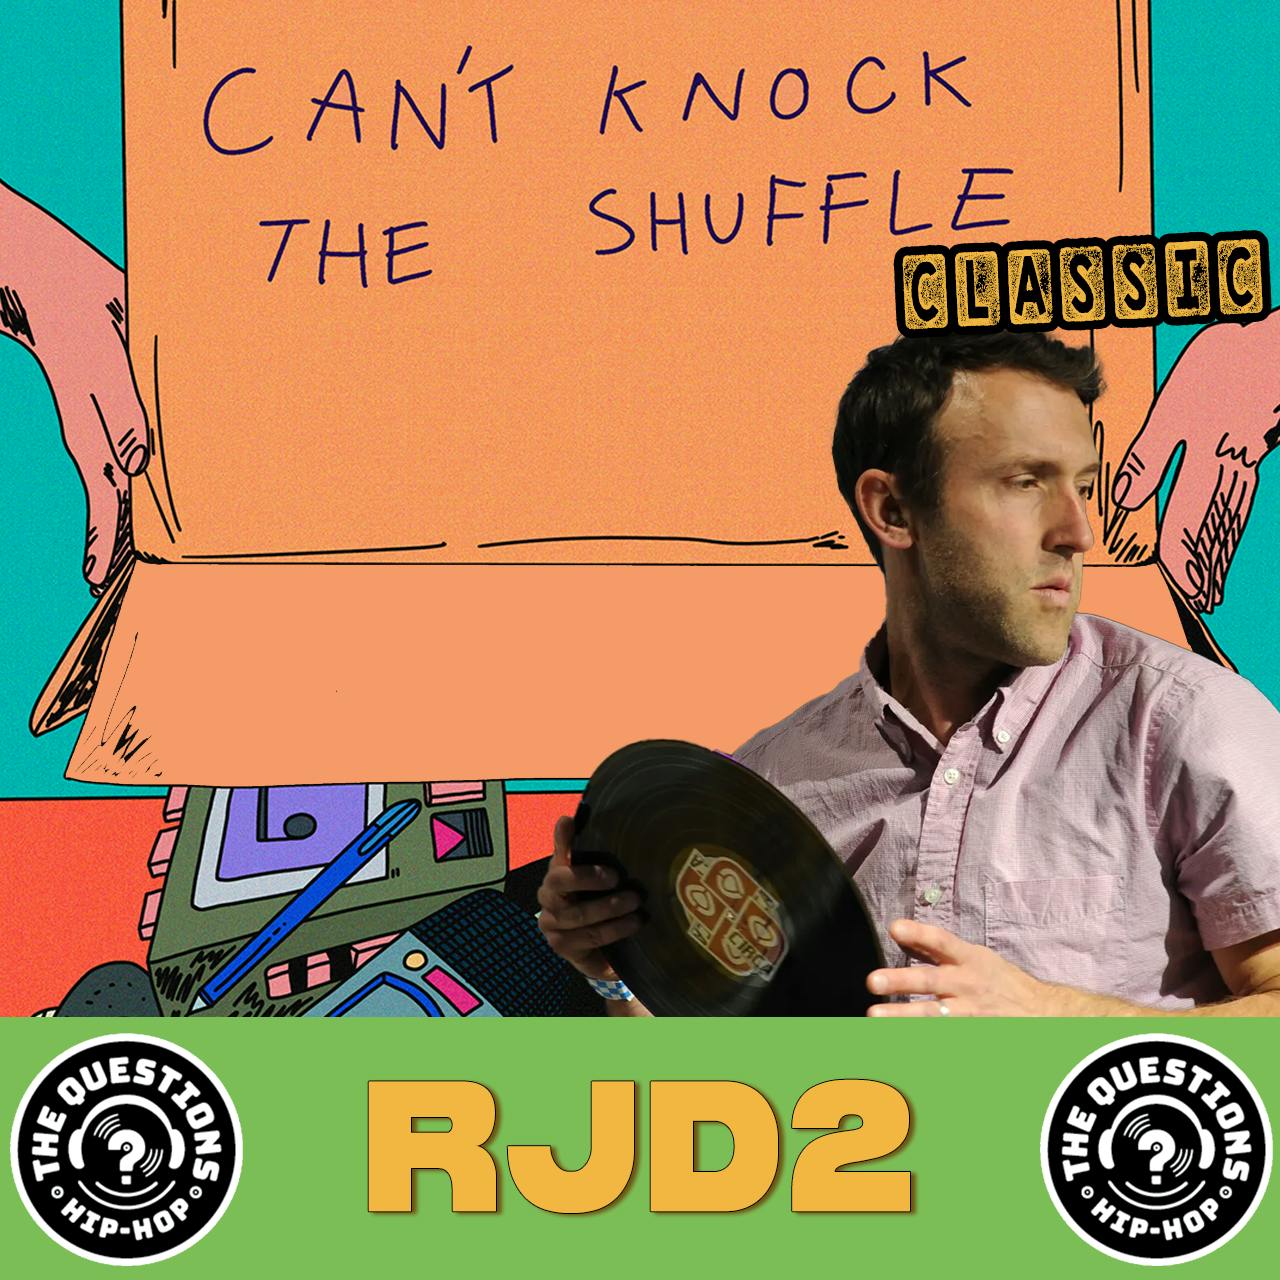 Rjd2 (Can't Knock the Shuffle Classic)